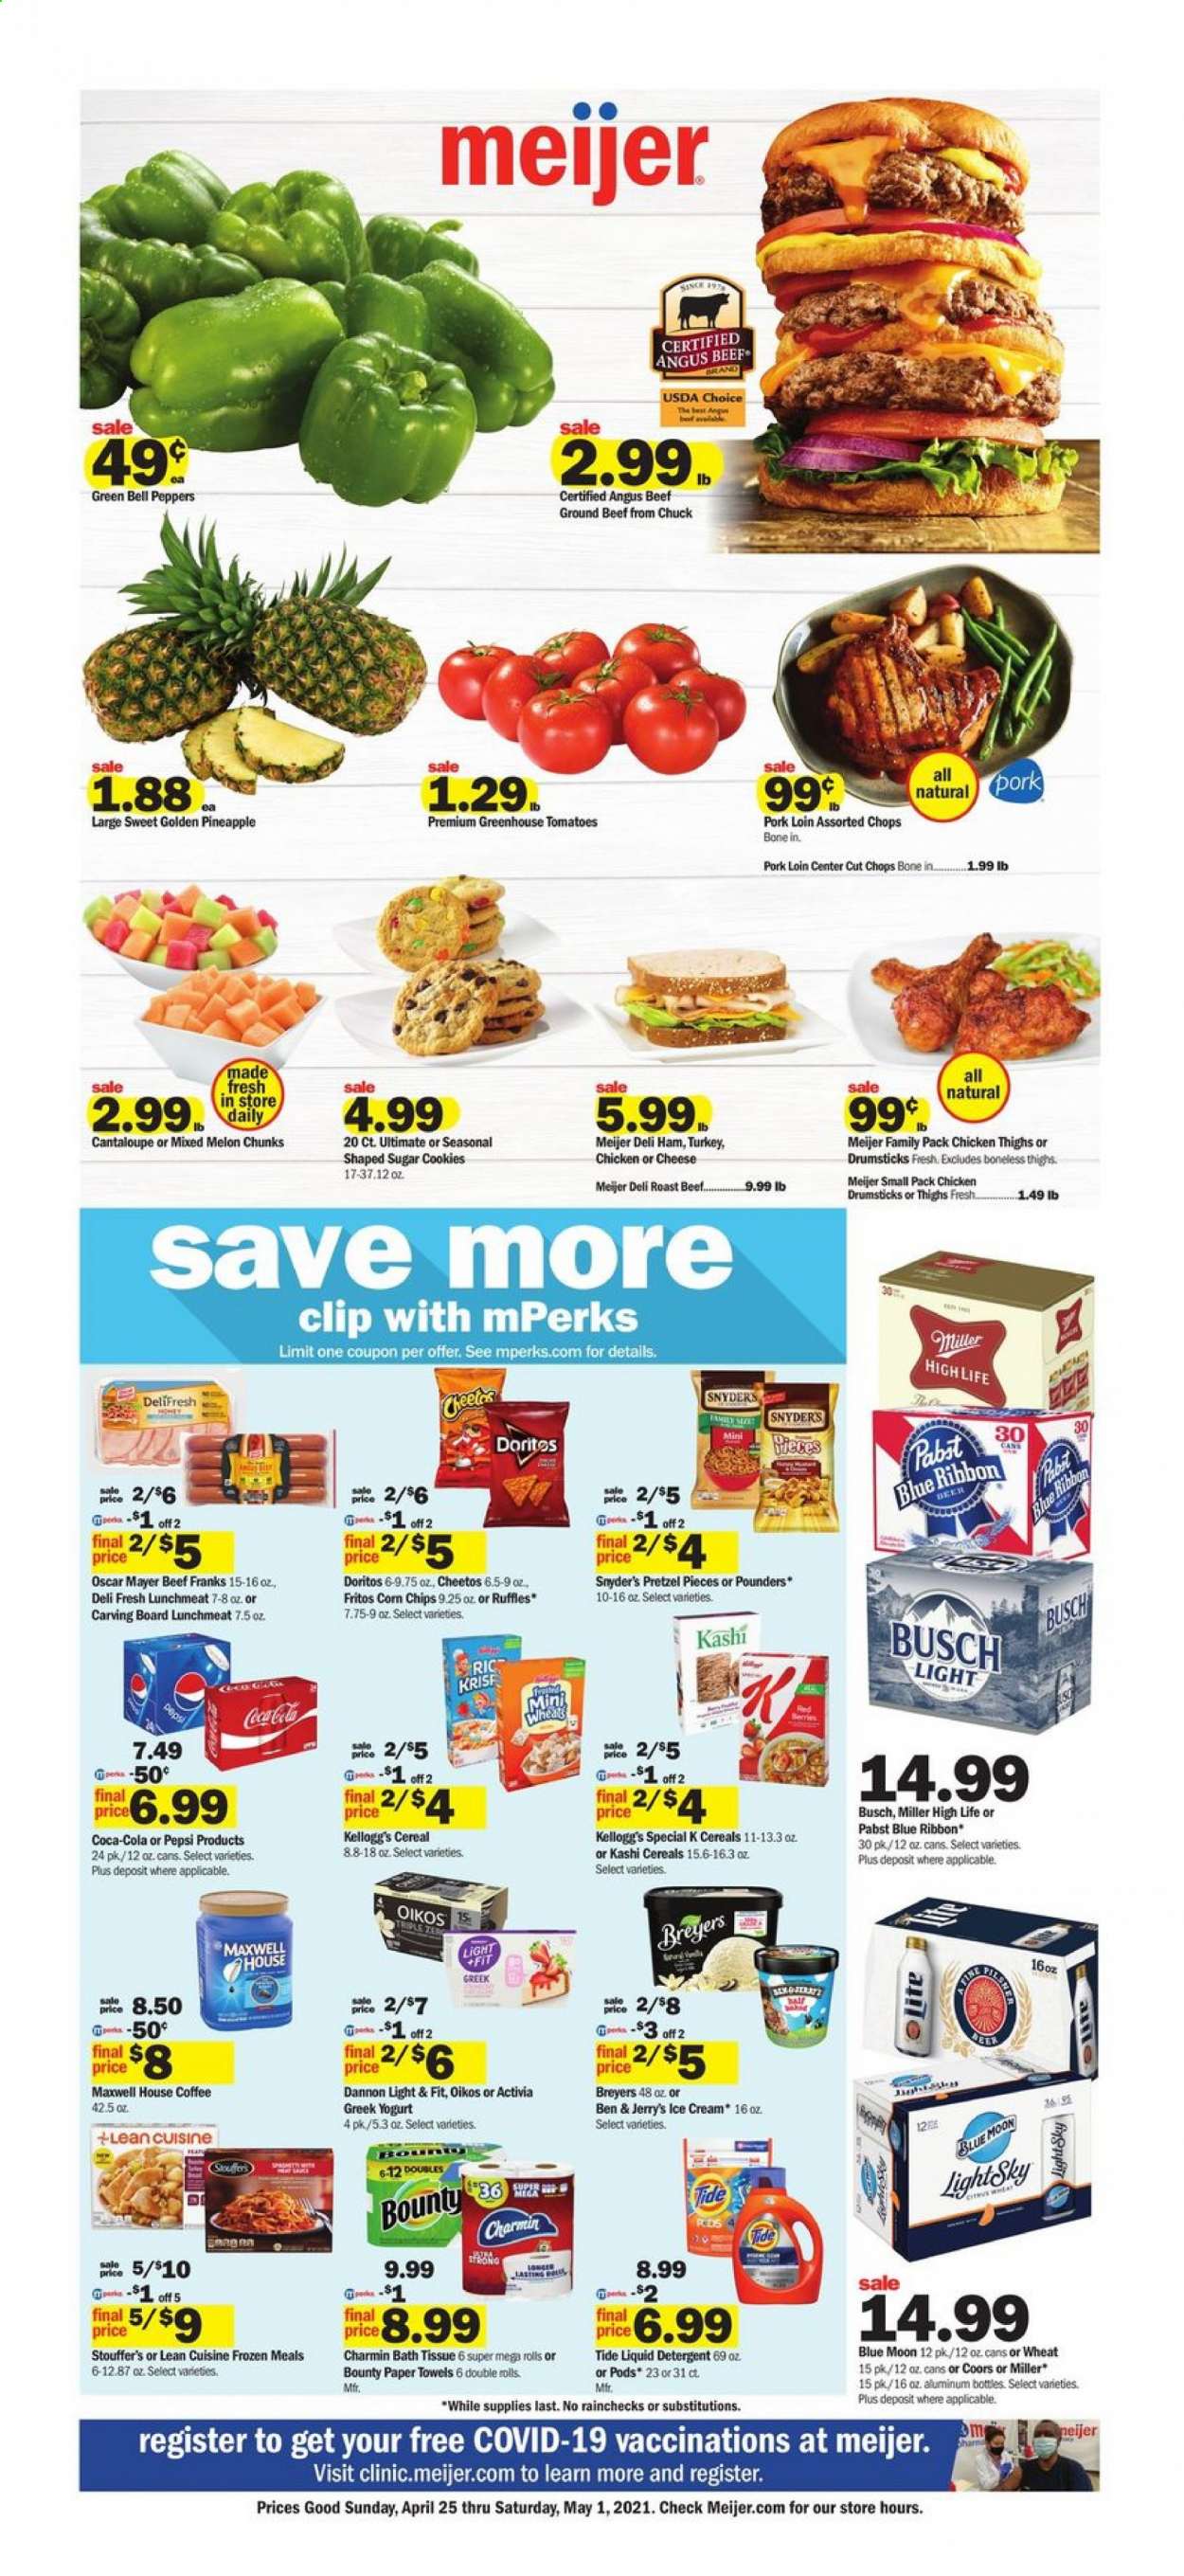 thumbnail - Meijer Flyer - 04/25/2021 - 05/01/2021 - Sales products - pretzels, bell peppers, cantaloupe, tomatoes, peppers, Lean Cuisine, ham, Oscar Mayer, lunch meat, greek yoghurt, yoghurt, Activia, Oikos, Dannon, ice cream, Ben & Jerry's, Stouffer's, cookies, Bounty, Kellogg's, Doritos, Fritos, Cheetos, Ruffles, cereals, rice, Coca-Cola, Pepsi, Maxwell House, coffee, beer, Coors, Blue Moon, Busch, Miller, Pabst Blue Ribbon, chicken thighs, chicken drumsticks, beef meat, ground beef, roast beef, pork loin, pork meat, bath tissue, kitchen towels, paper towels, Charmin, detergent, Tide, liquid detergent, mouse, pineapple, melons. Page 1.